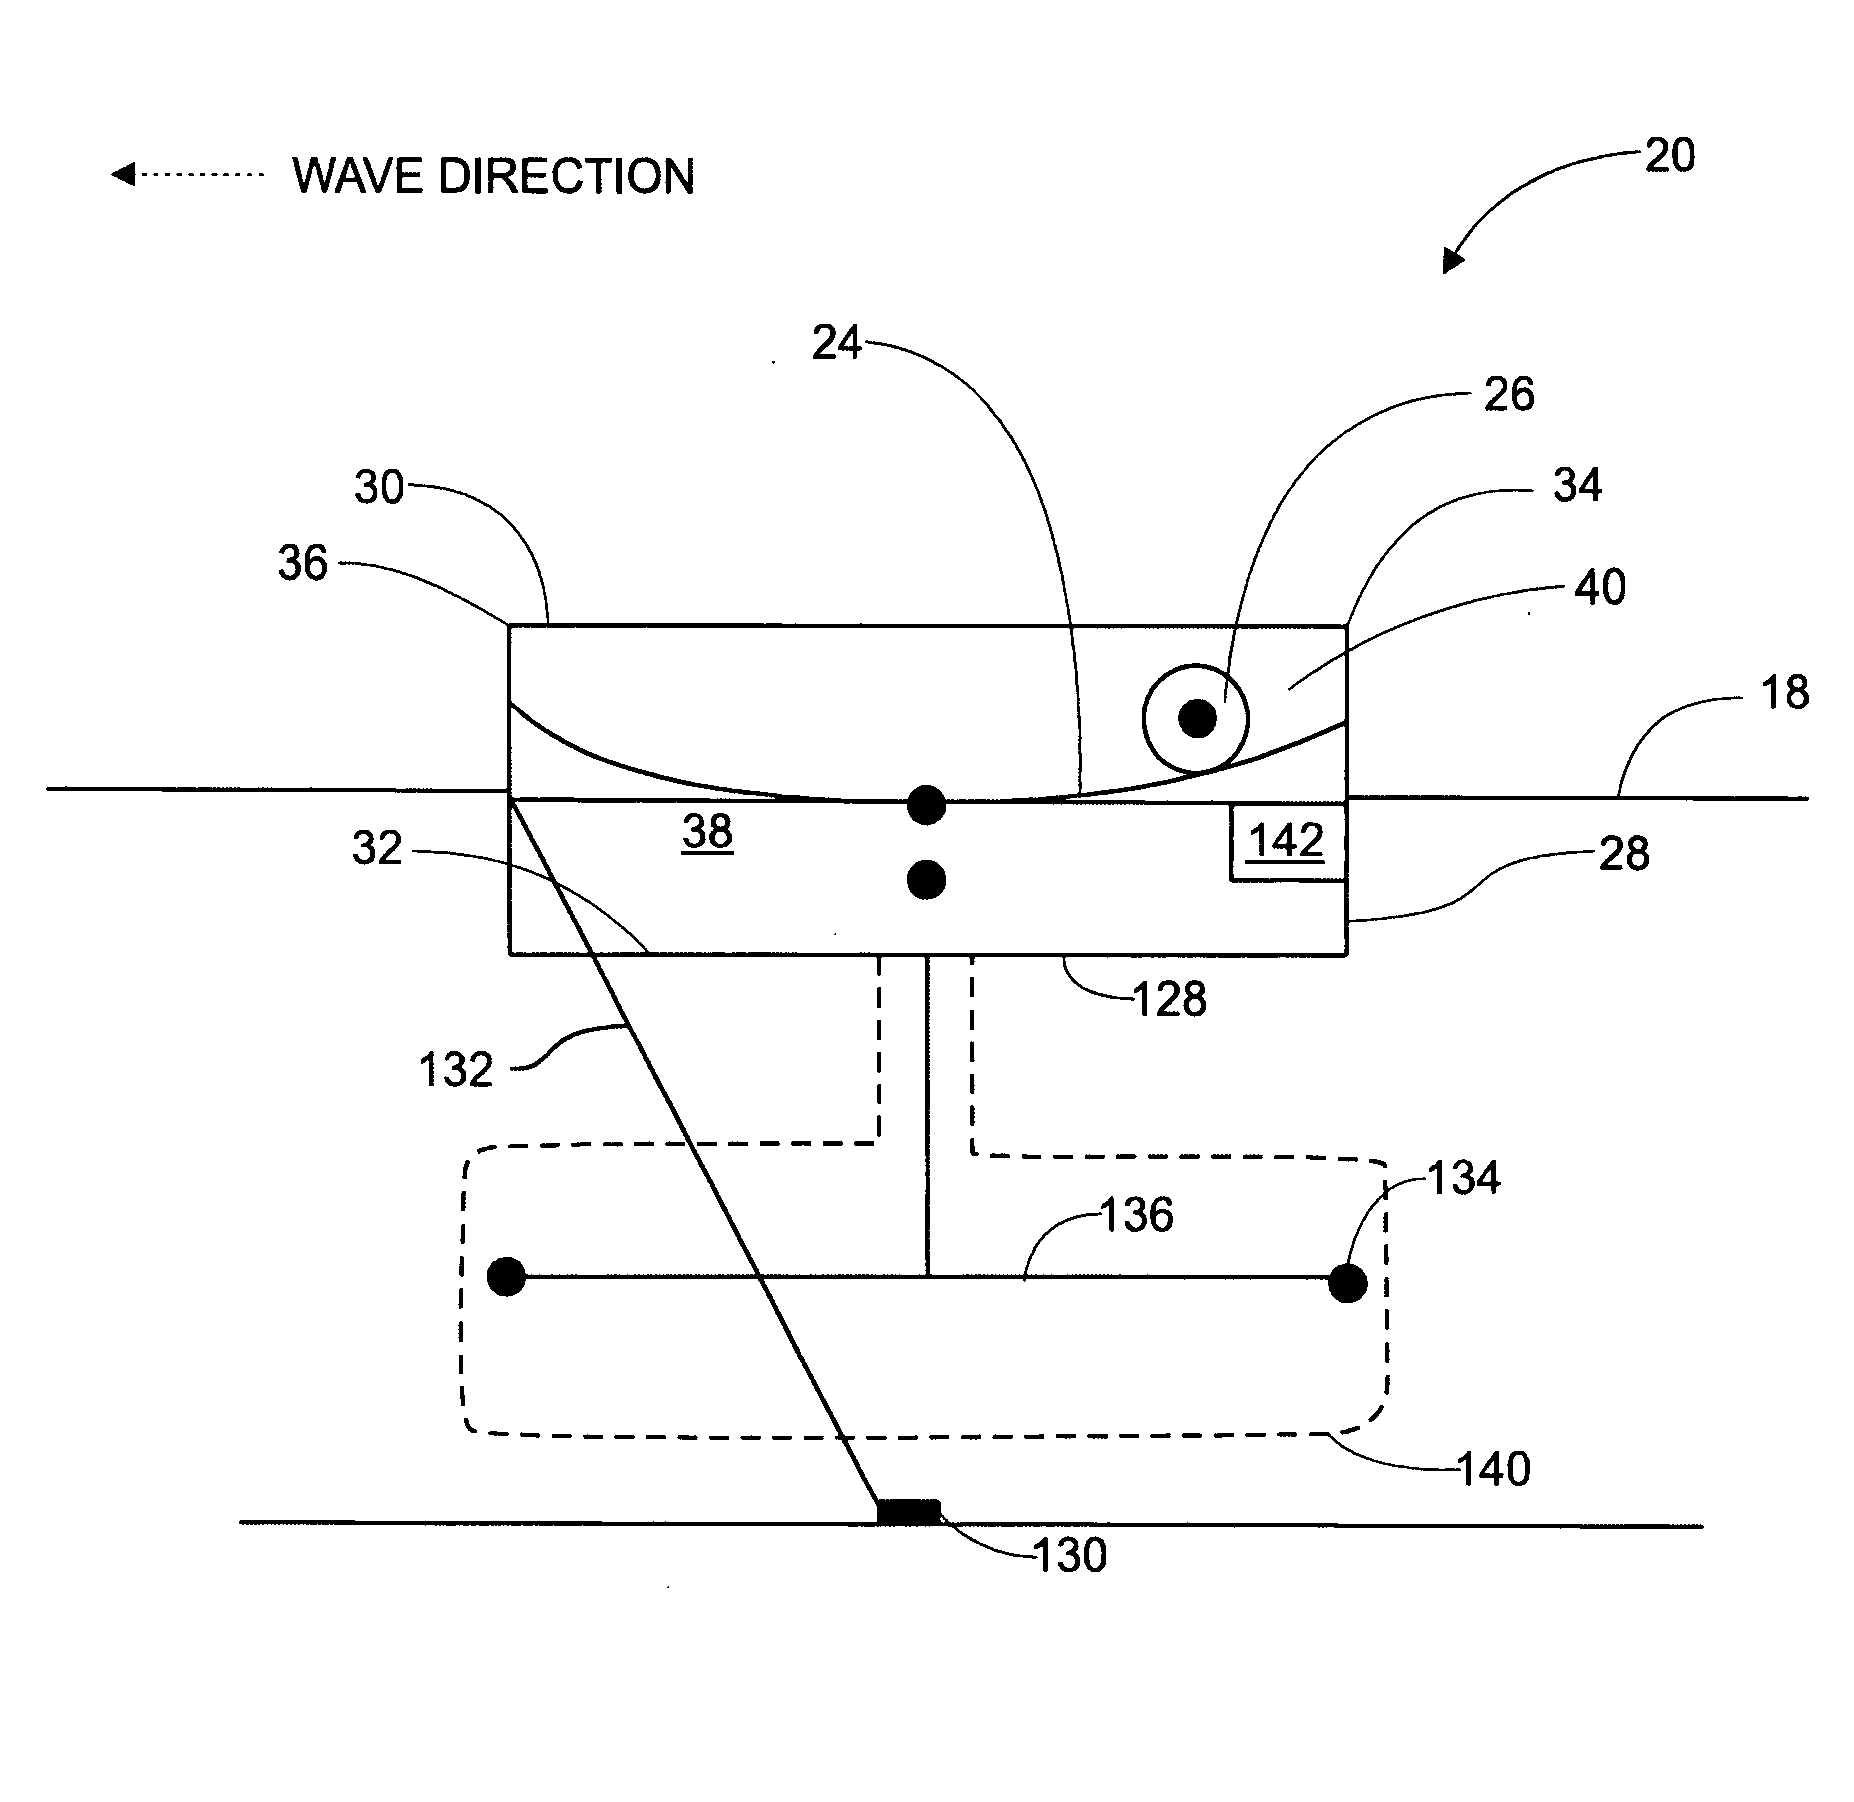 System for producing electricity through the action of waves on floating platforms